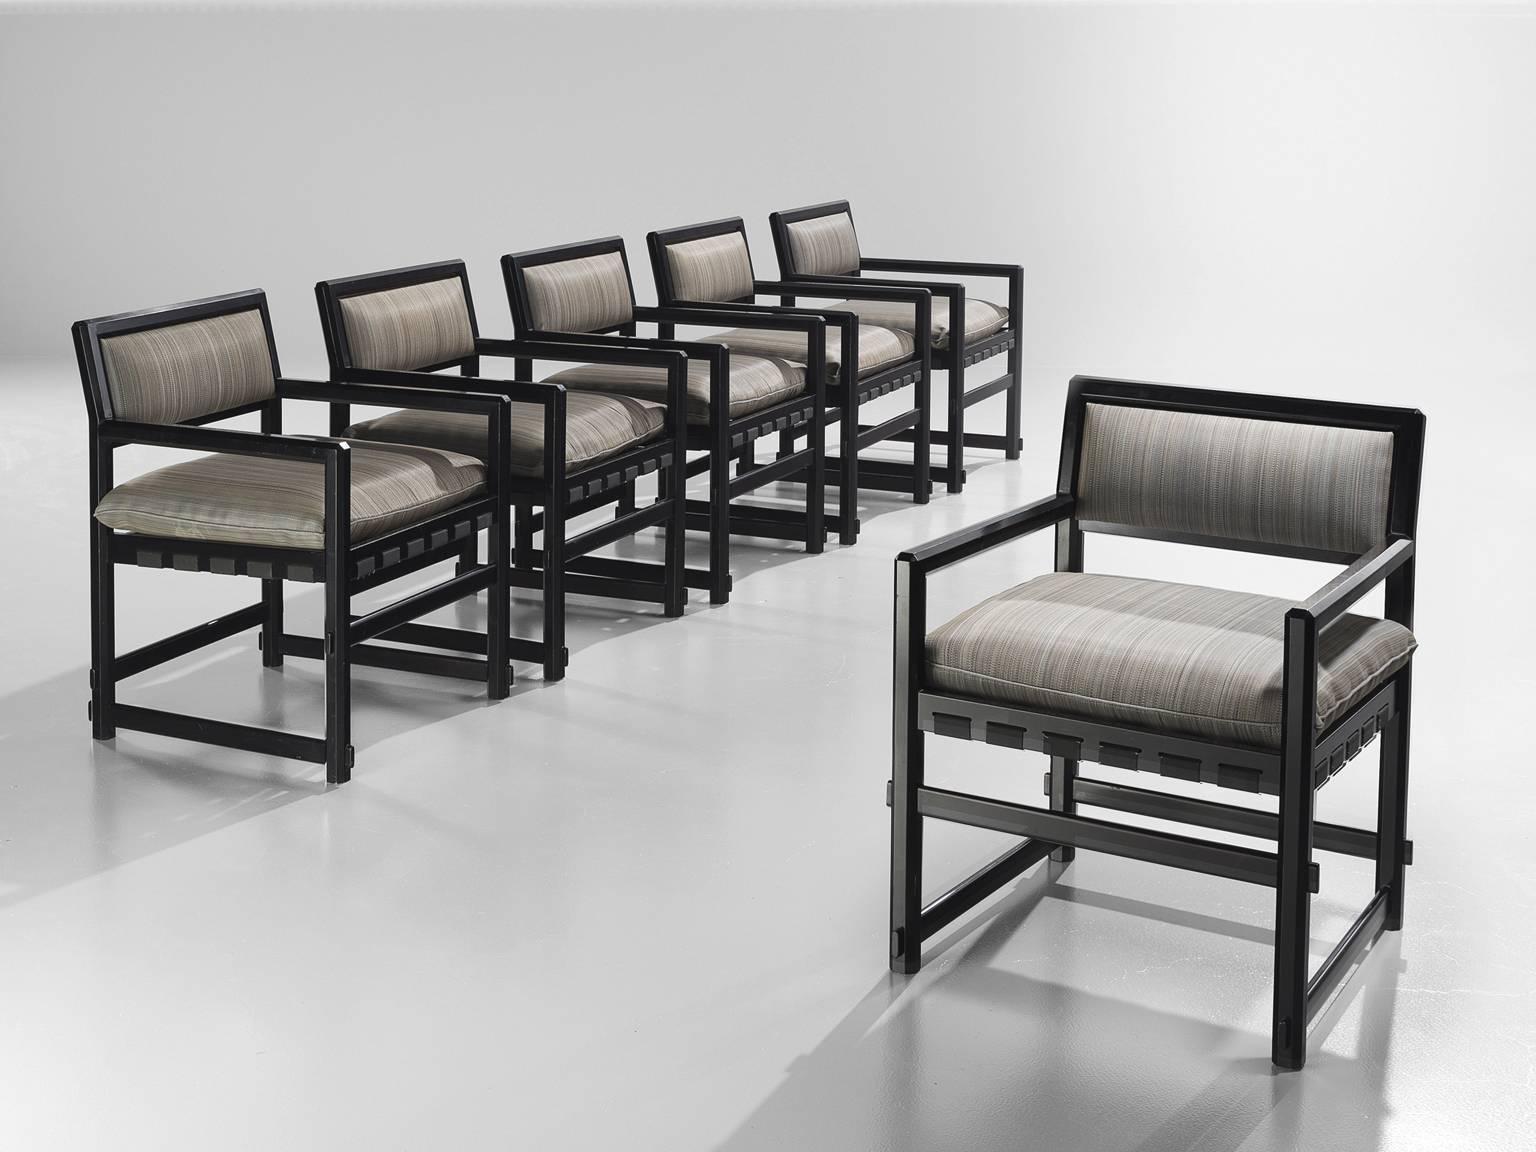 Set of six armchairs, lacquered black wood and fabric, design by Edward Wormely for Dunbar executed by Mobilier Universel, Jules Wabbes, Belgium, 1960s.

This set of six grand armchairs is executed with a rare black lacquered frame and soft